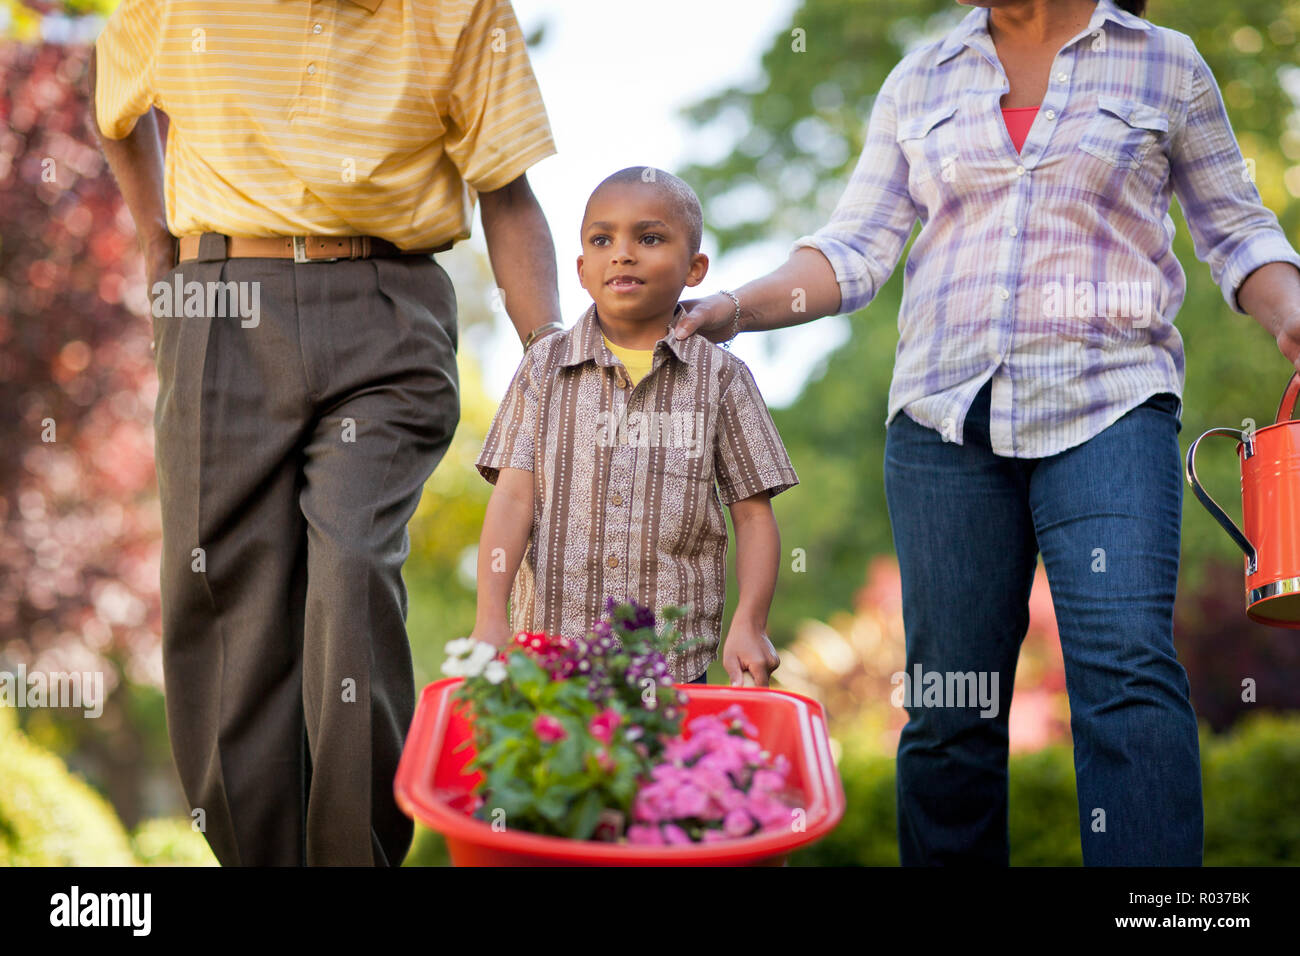 Young boy pushing a wheelbarrow full of flowering plants while in the back yard with his father and mother. Stock Photo